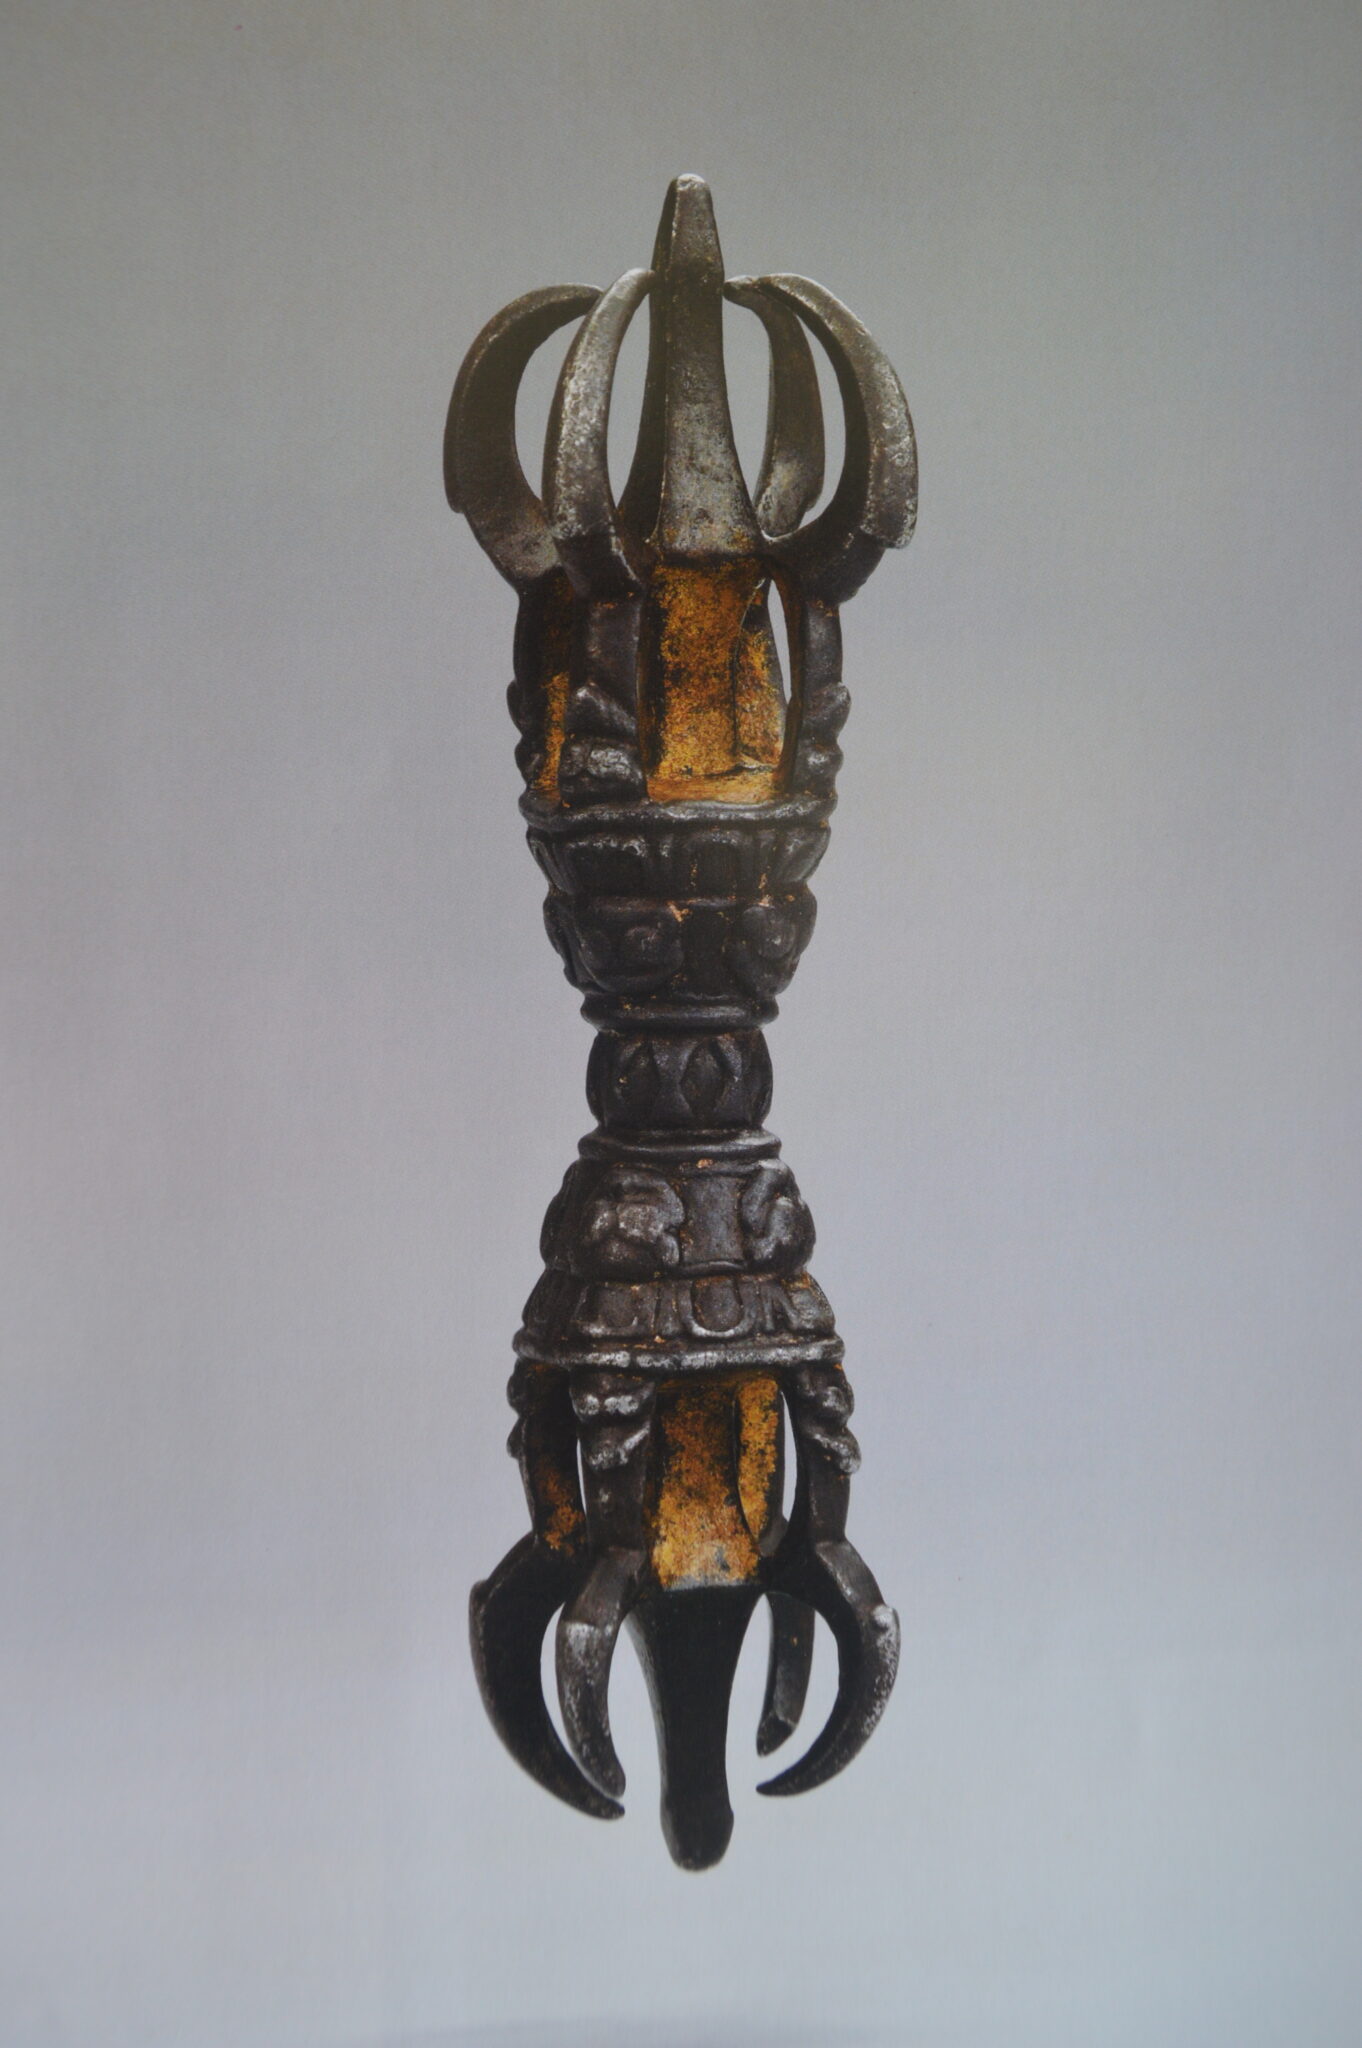 Religious implement in vajra shape: two open spheres formed by curved prongs connected by shaft featuring decorated bands